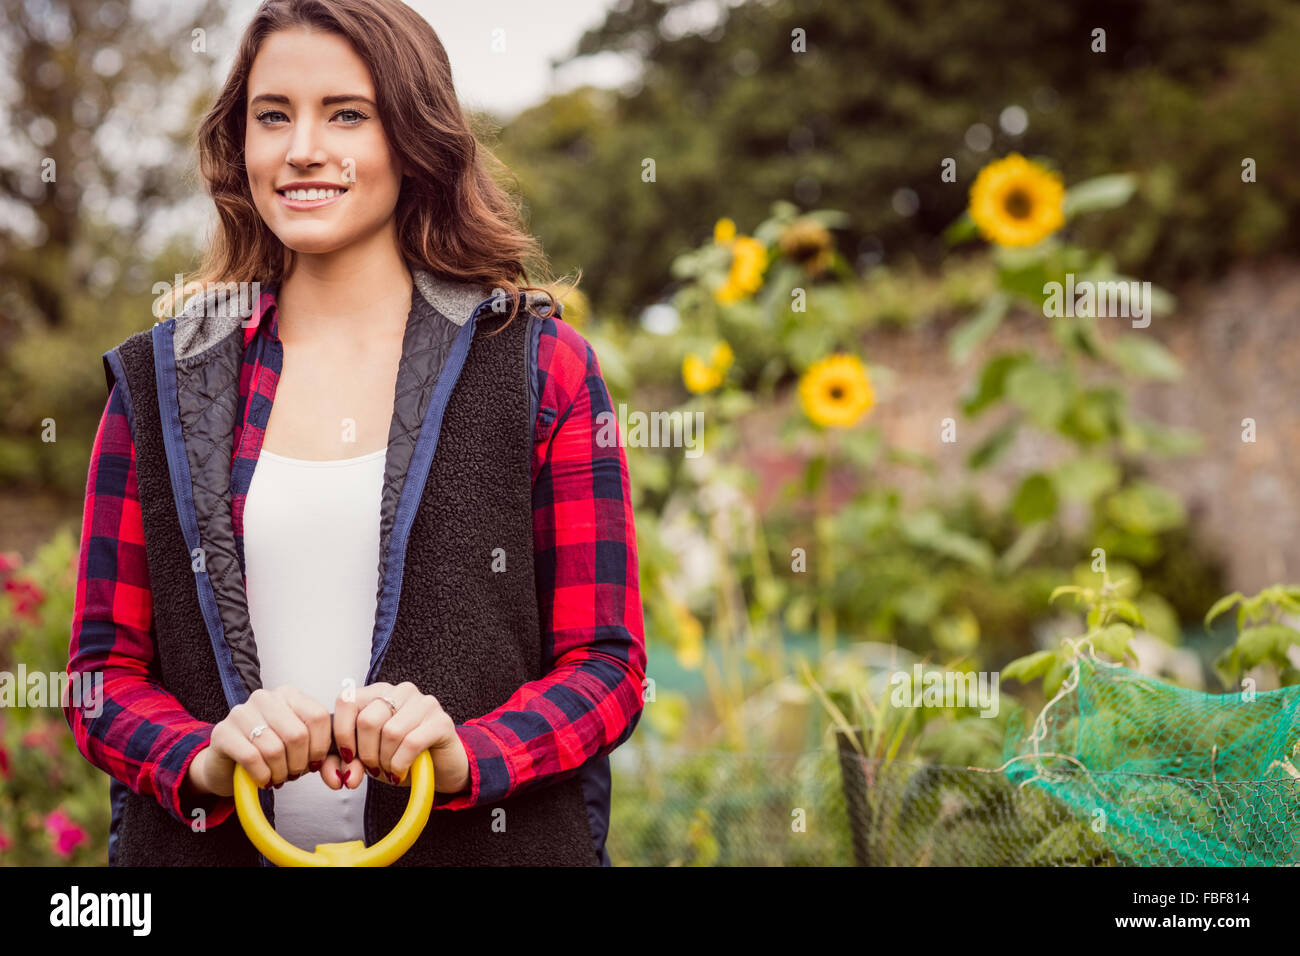 Portrait of a smiling woman Stock Photo